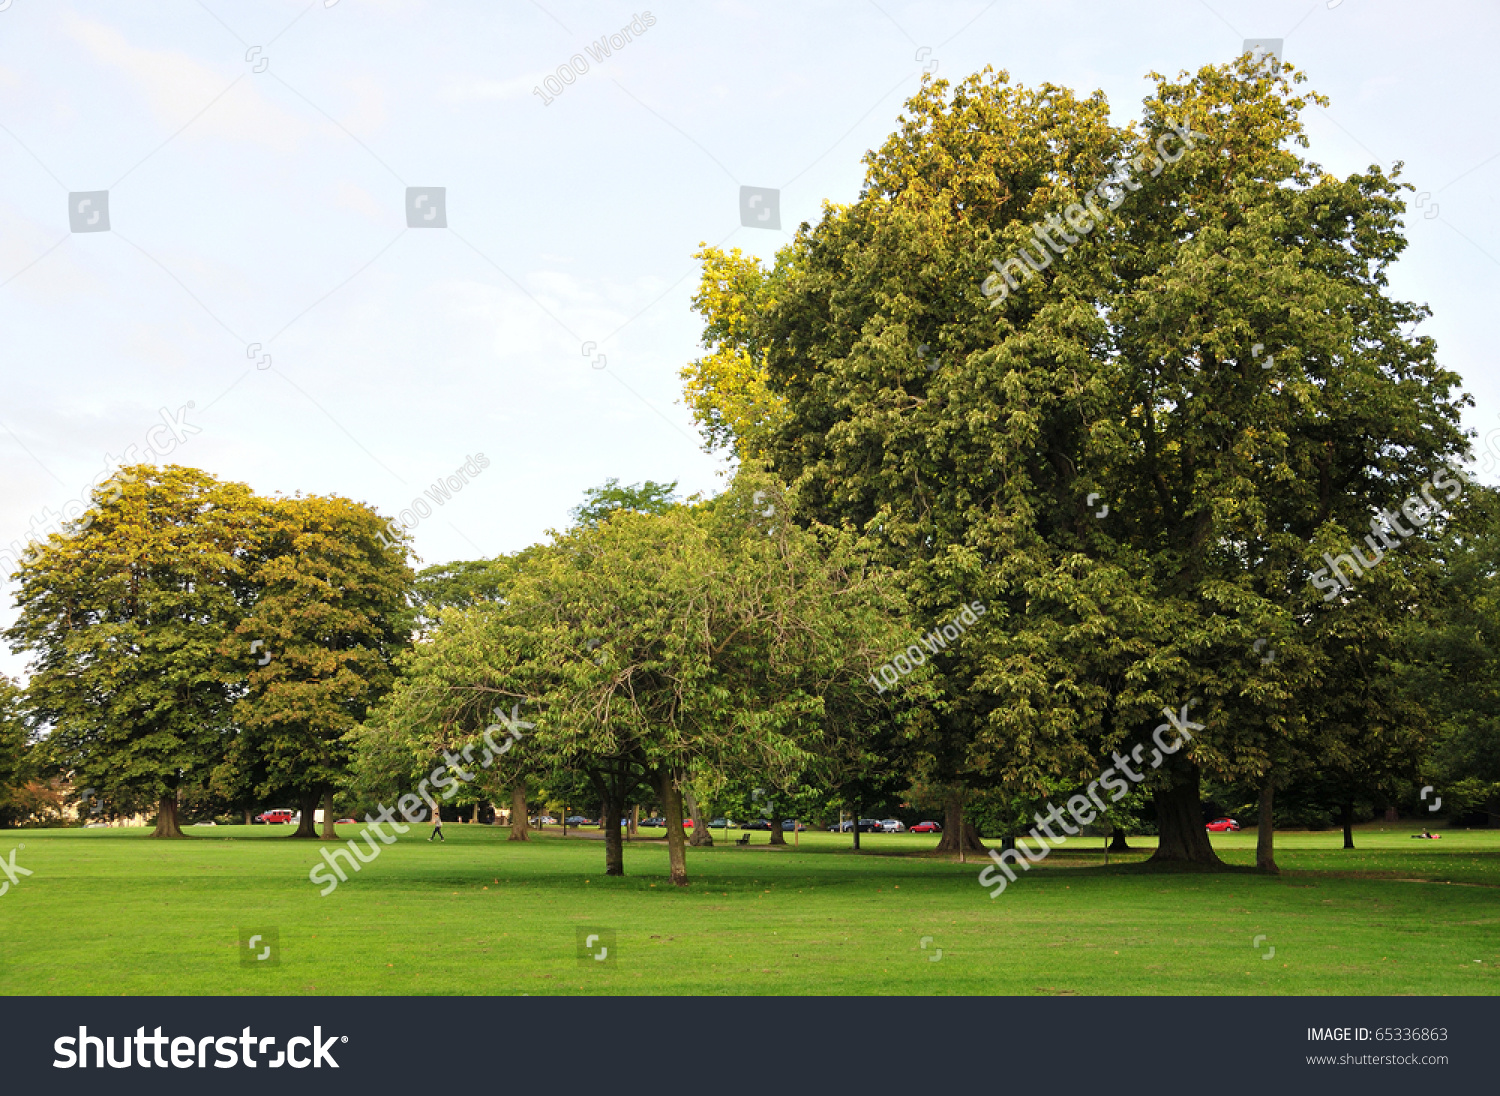 Public Park With Mature Trees And Lots Of Green Open Space Stock Photo ...